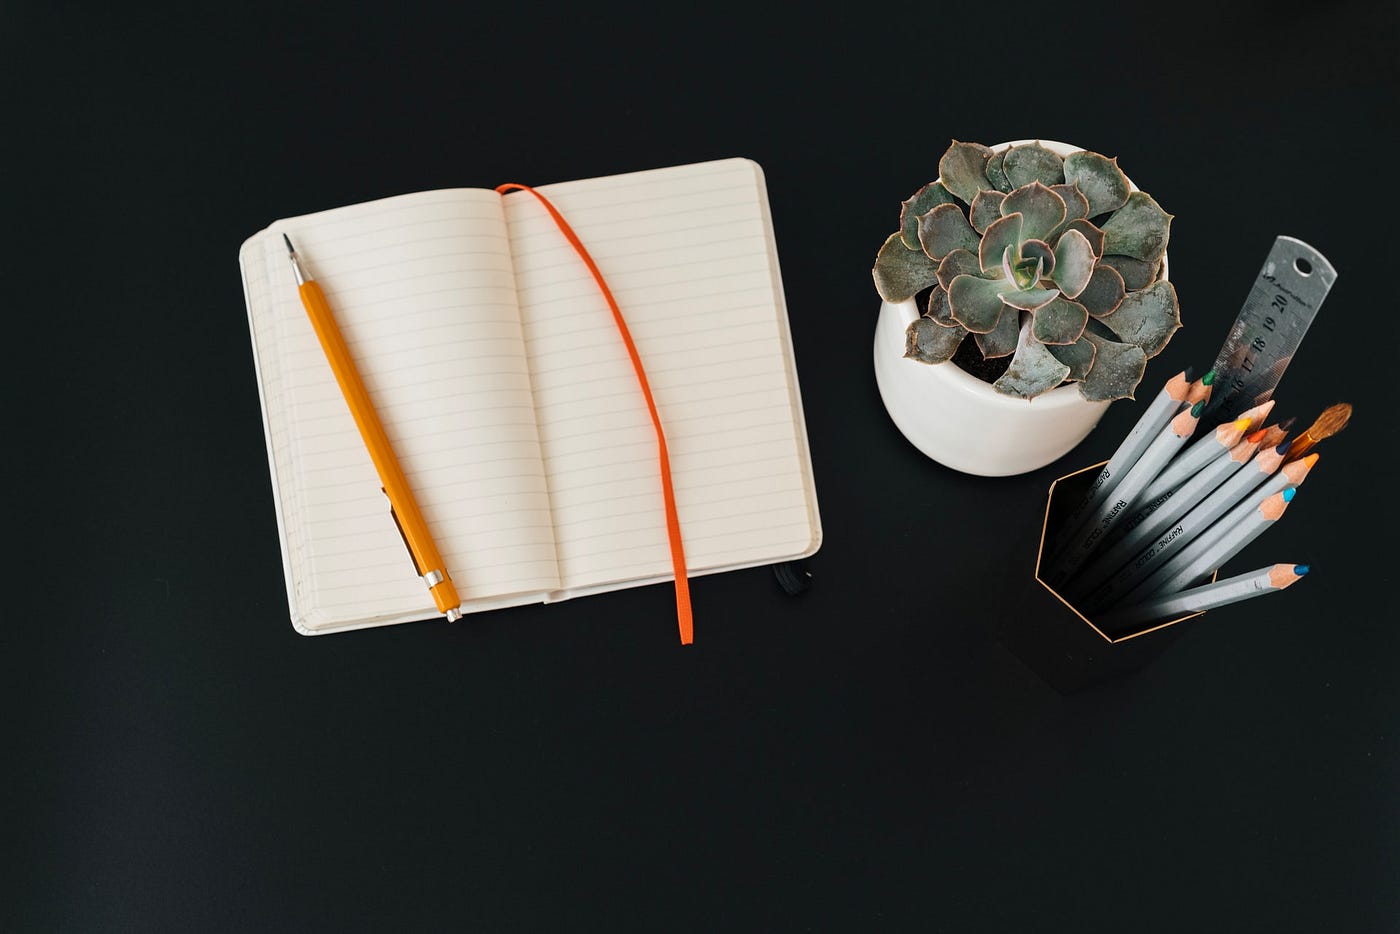 An open notebook and yellow pencil on a black background. There is also a small potted plant and a pencil stand with a bunch of pencils in it.